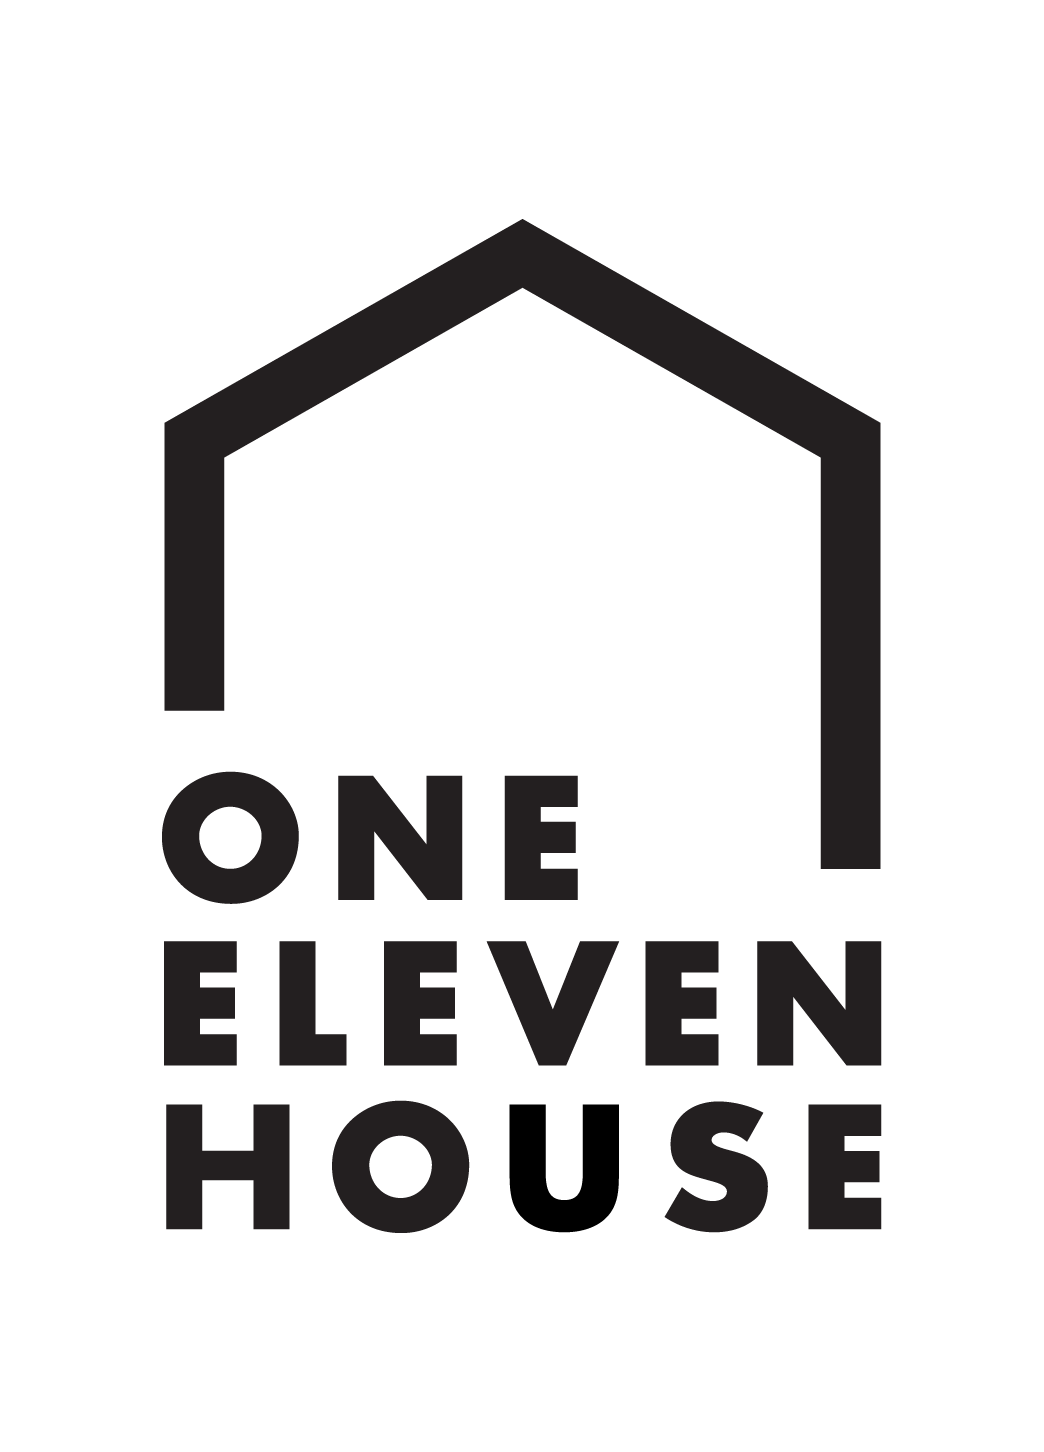 Logomark for the one-eleven house. Three vertical lines support a roof and underneath them are the words One Eleven.